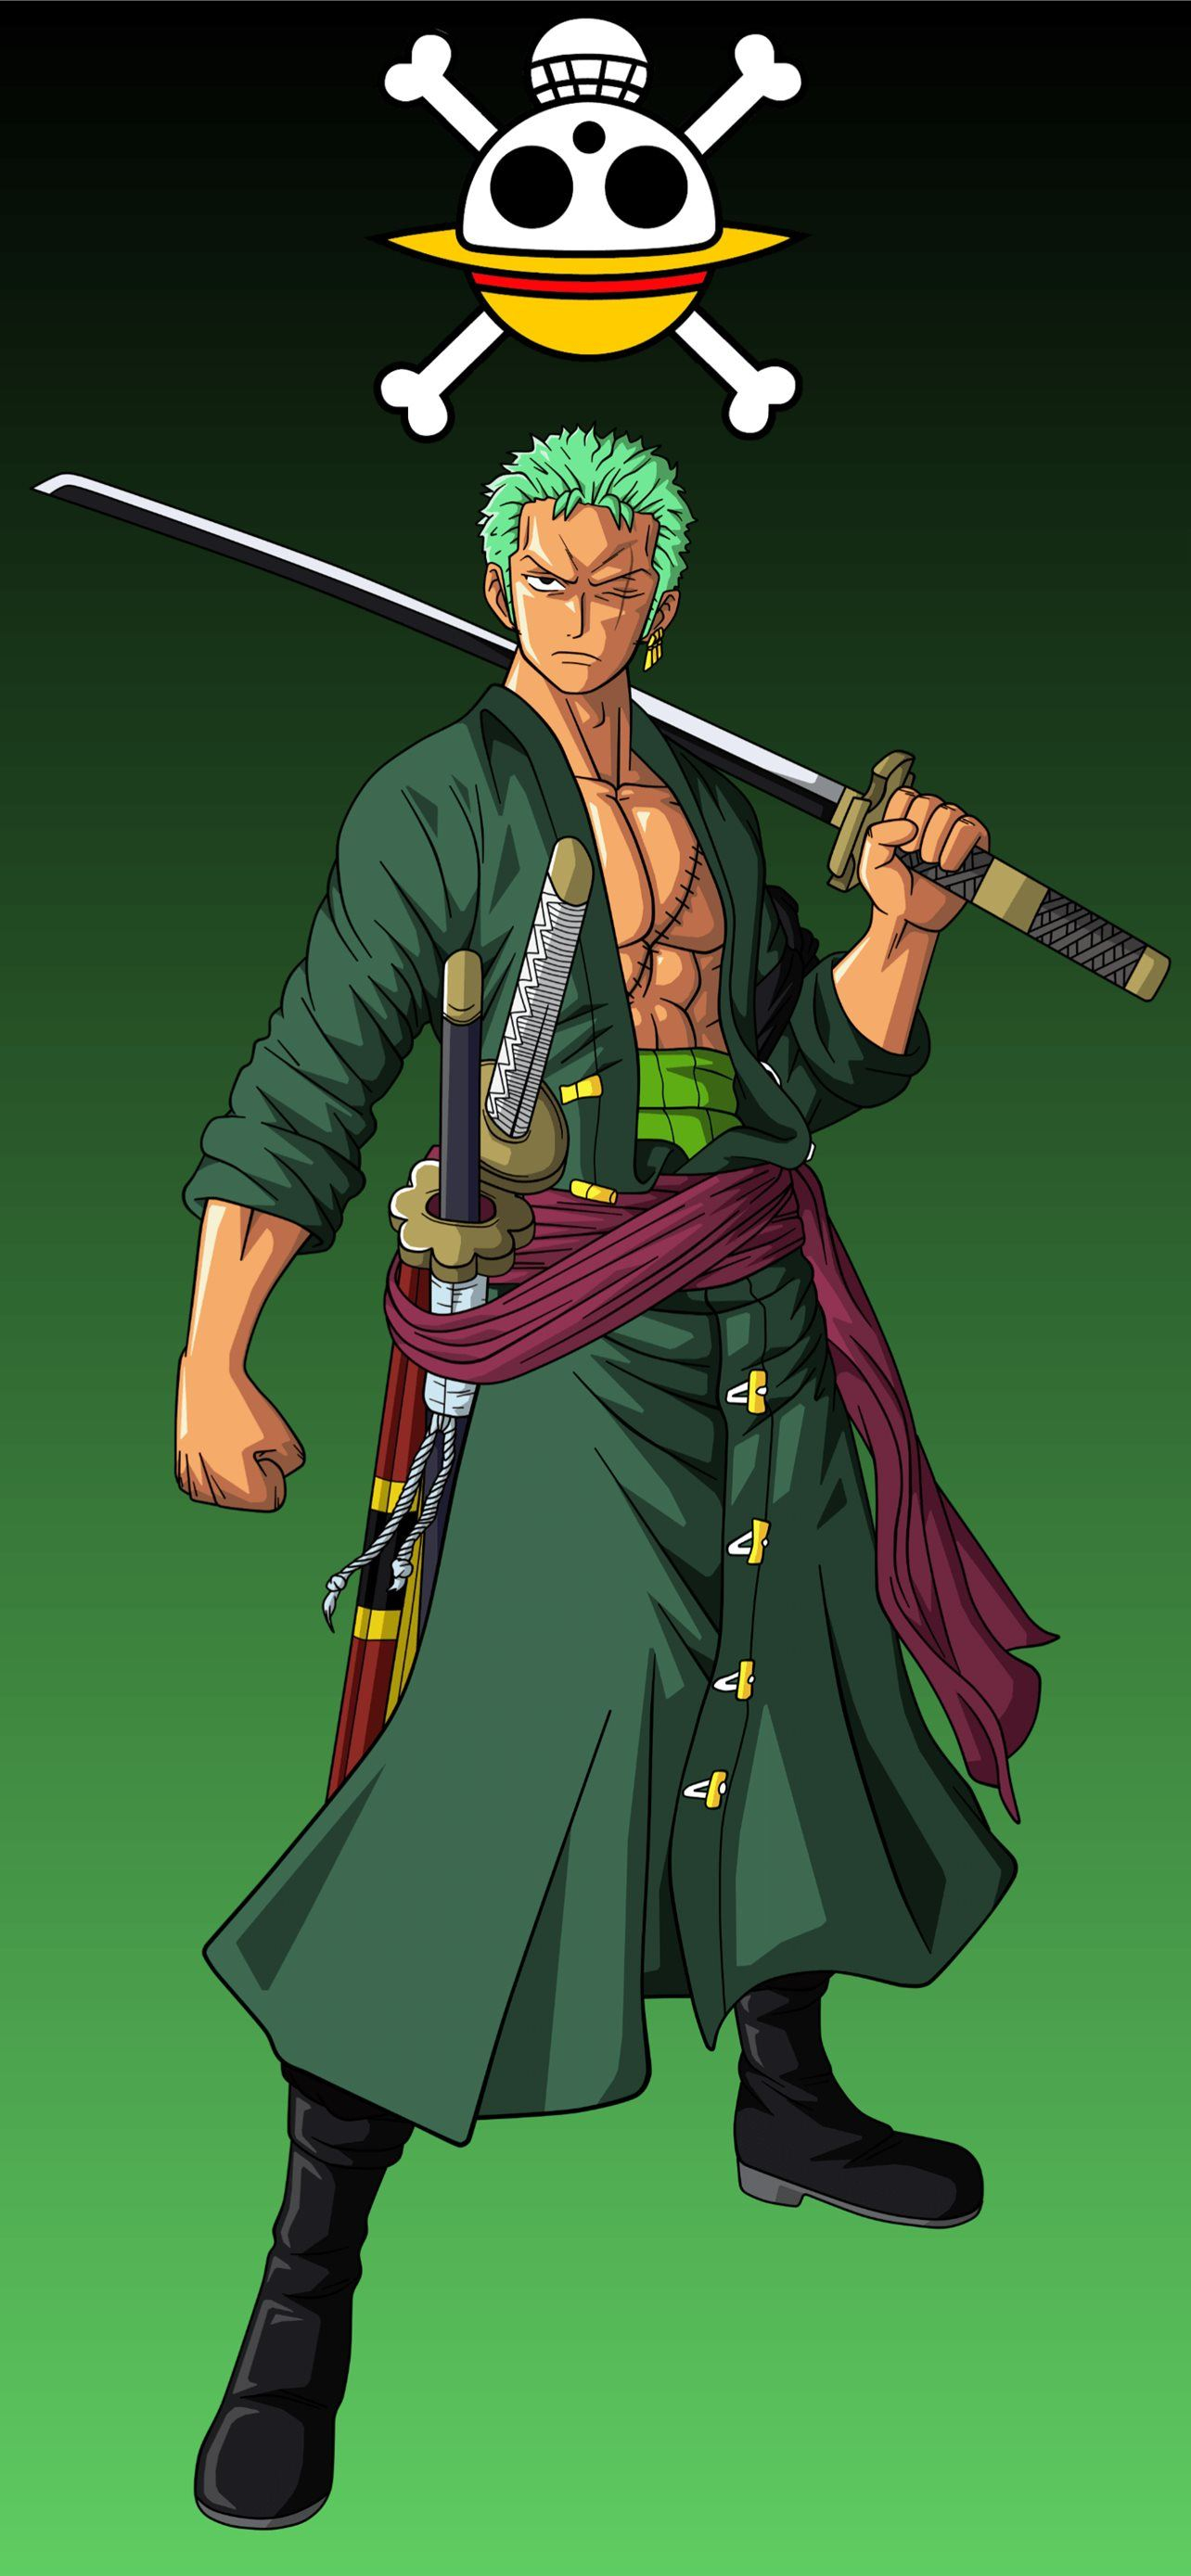 1284x2778 One Piece Zoro on Dog iPhone Wallpapers Free Download